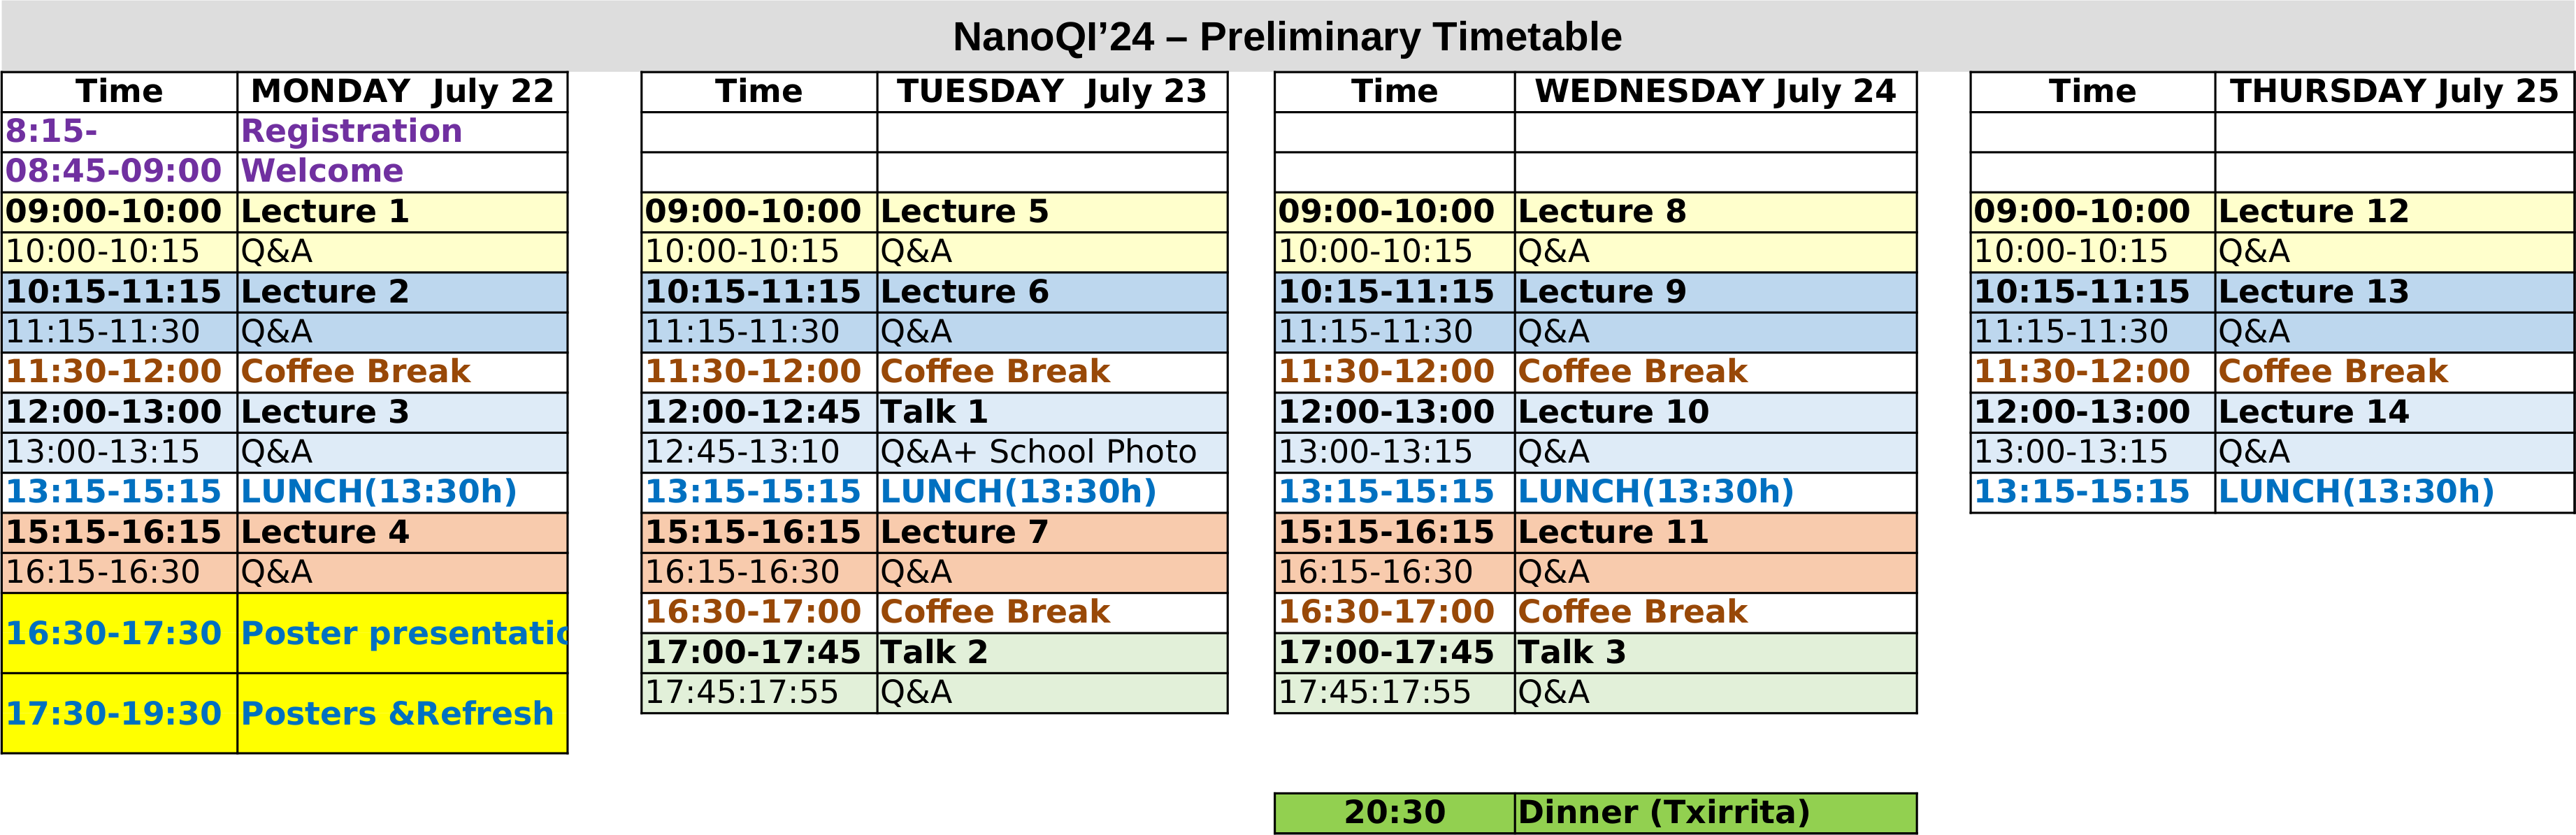 preliminary time table